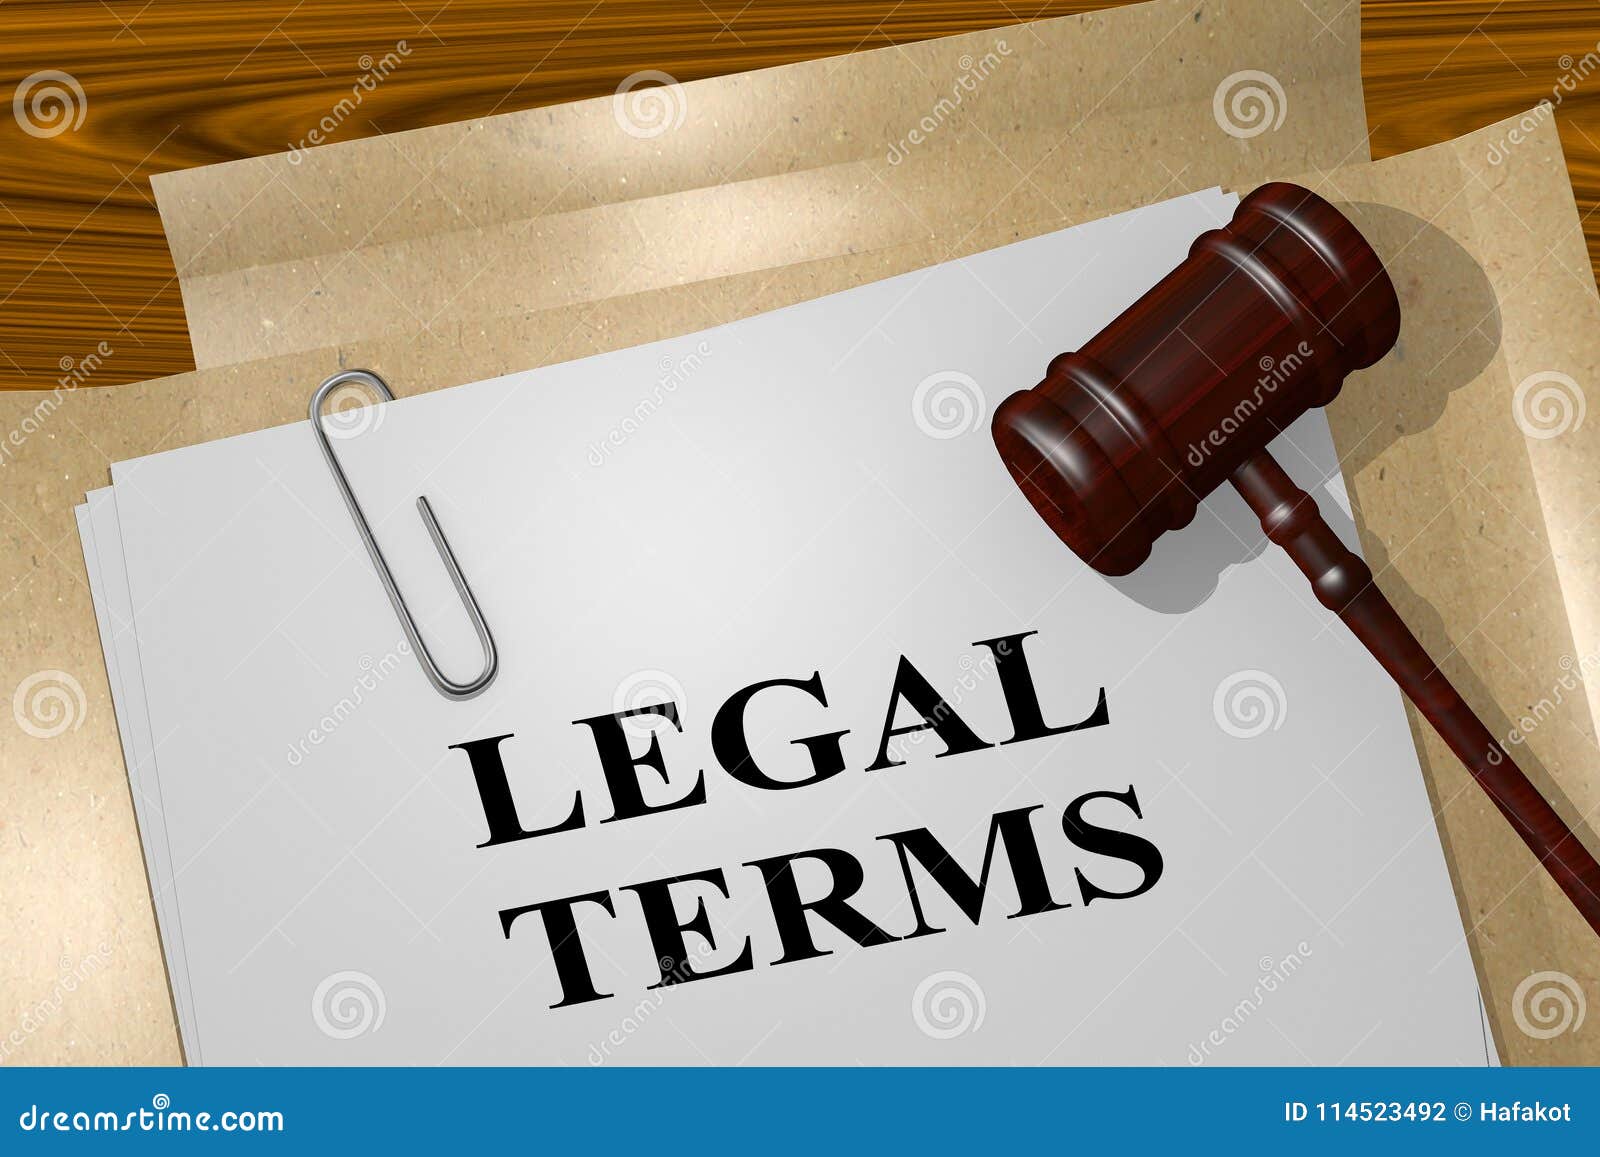 assignment legal term meaning